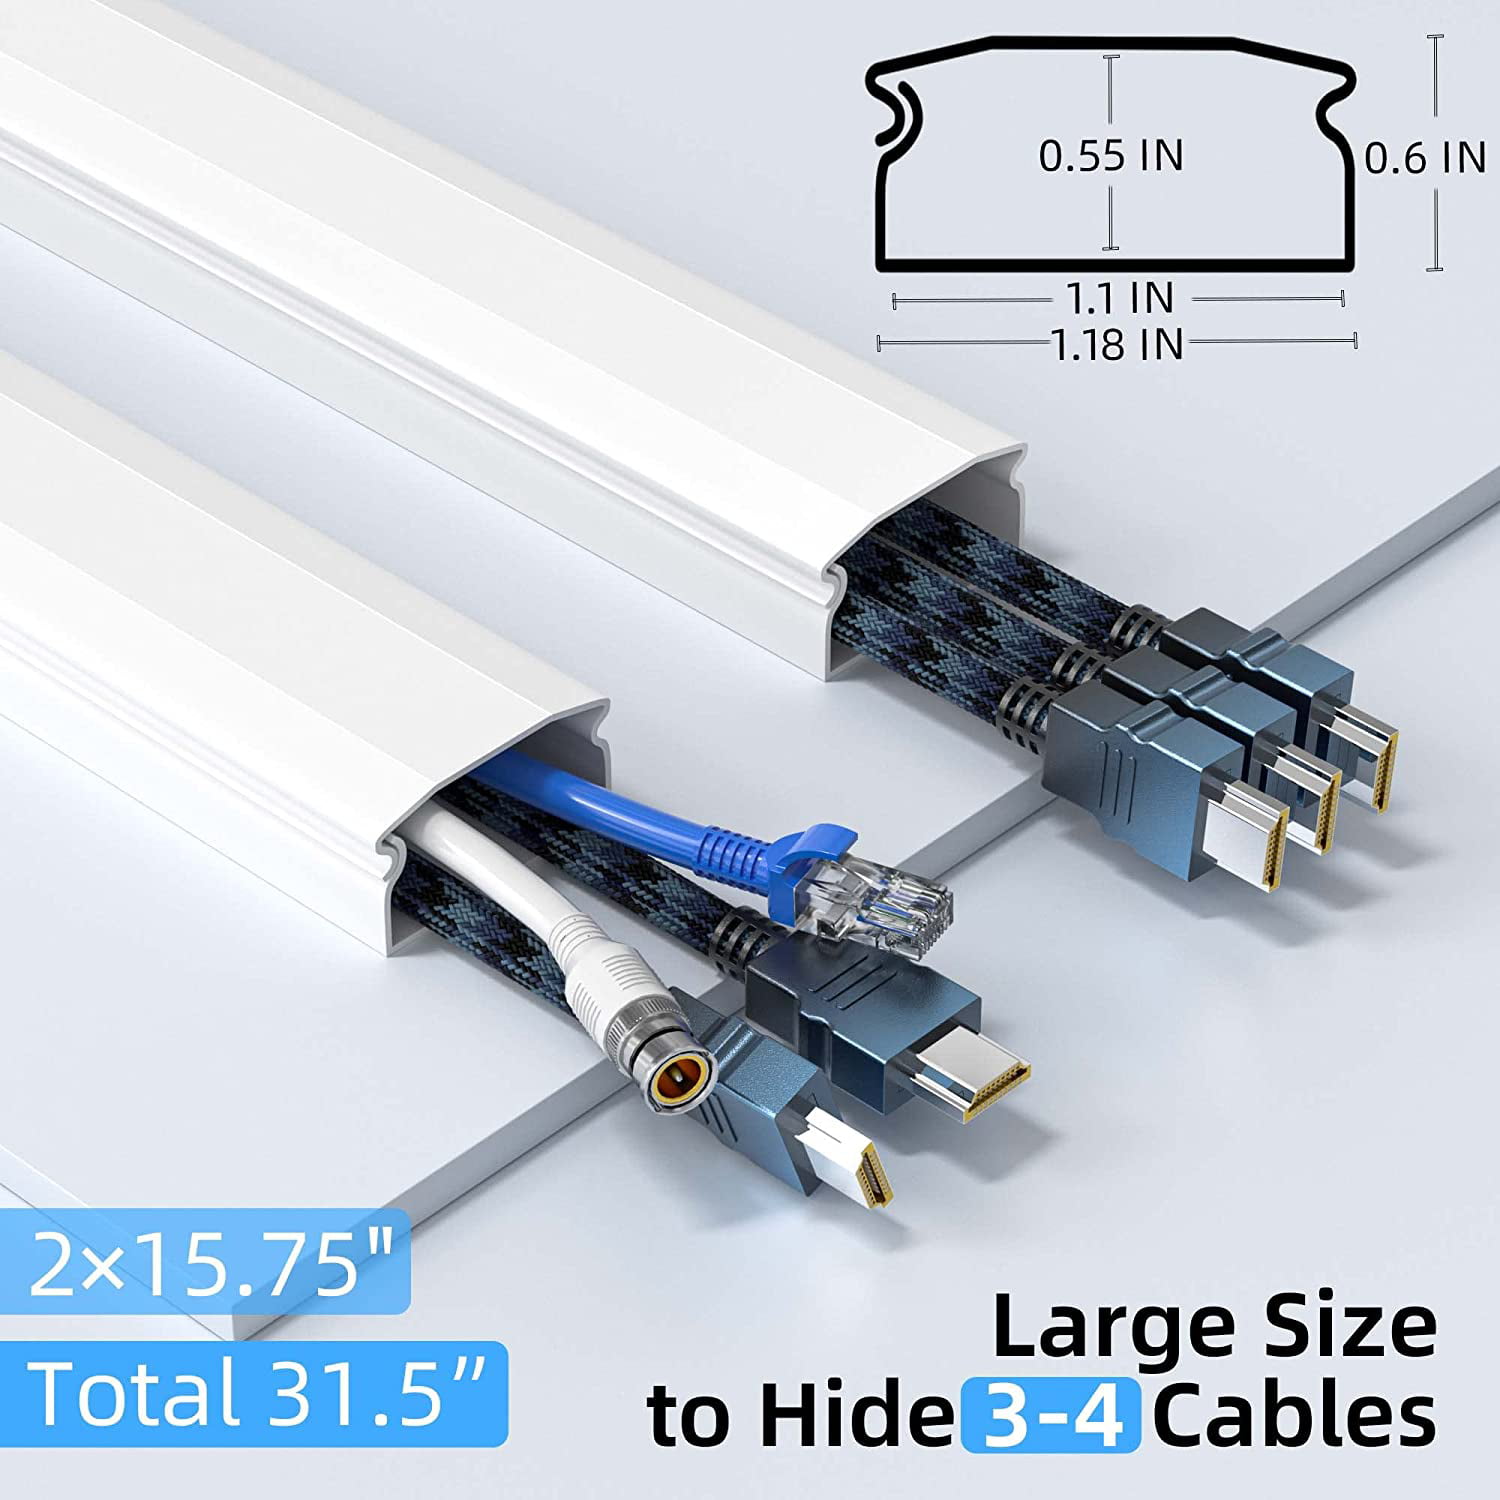 Wire hider wall • Compare (5 products) see prices »